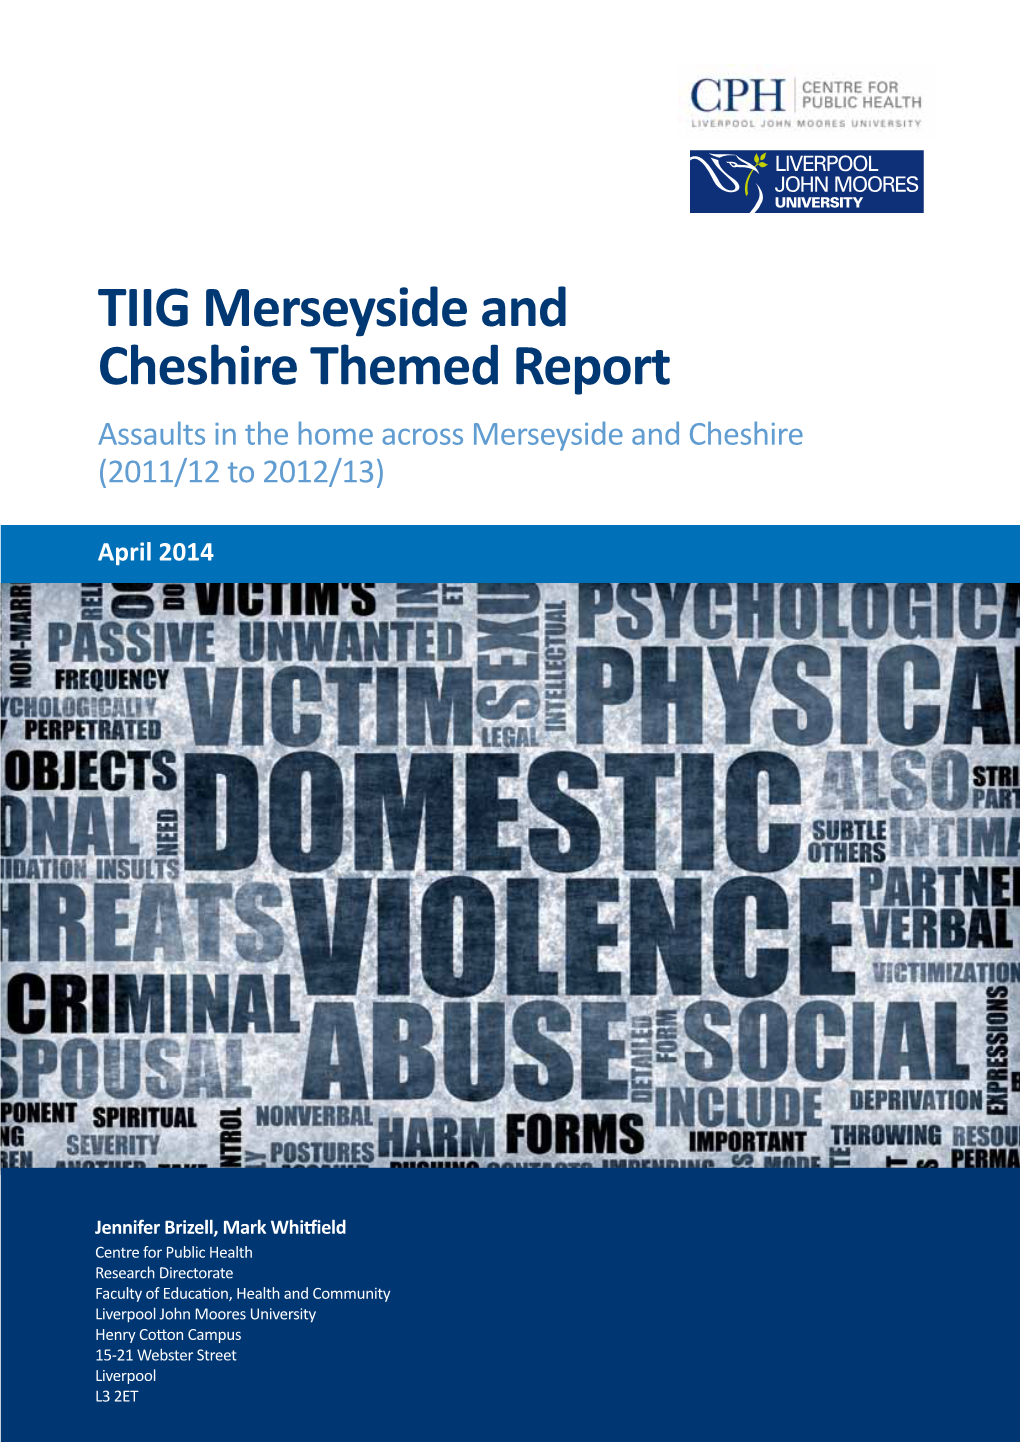 TIIG Merseyside and Cheshire Themed Report Assaults in the Home Across Merseyside and Cheshire (2011/12 to 2012/13)